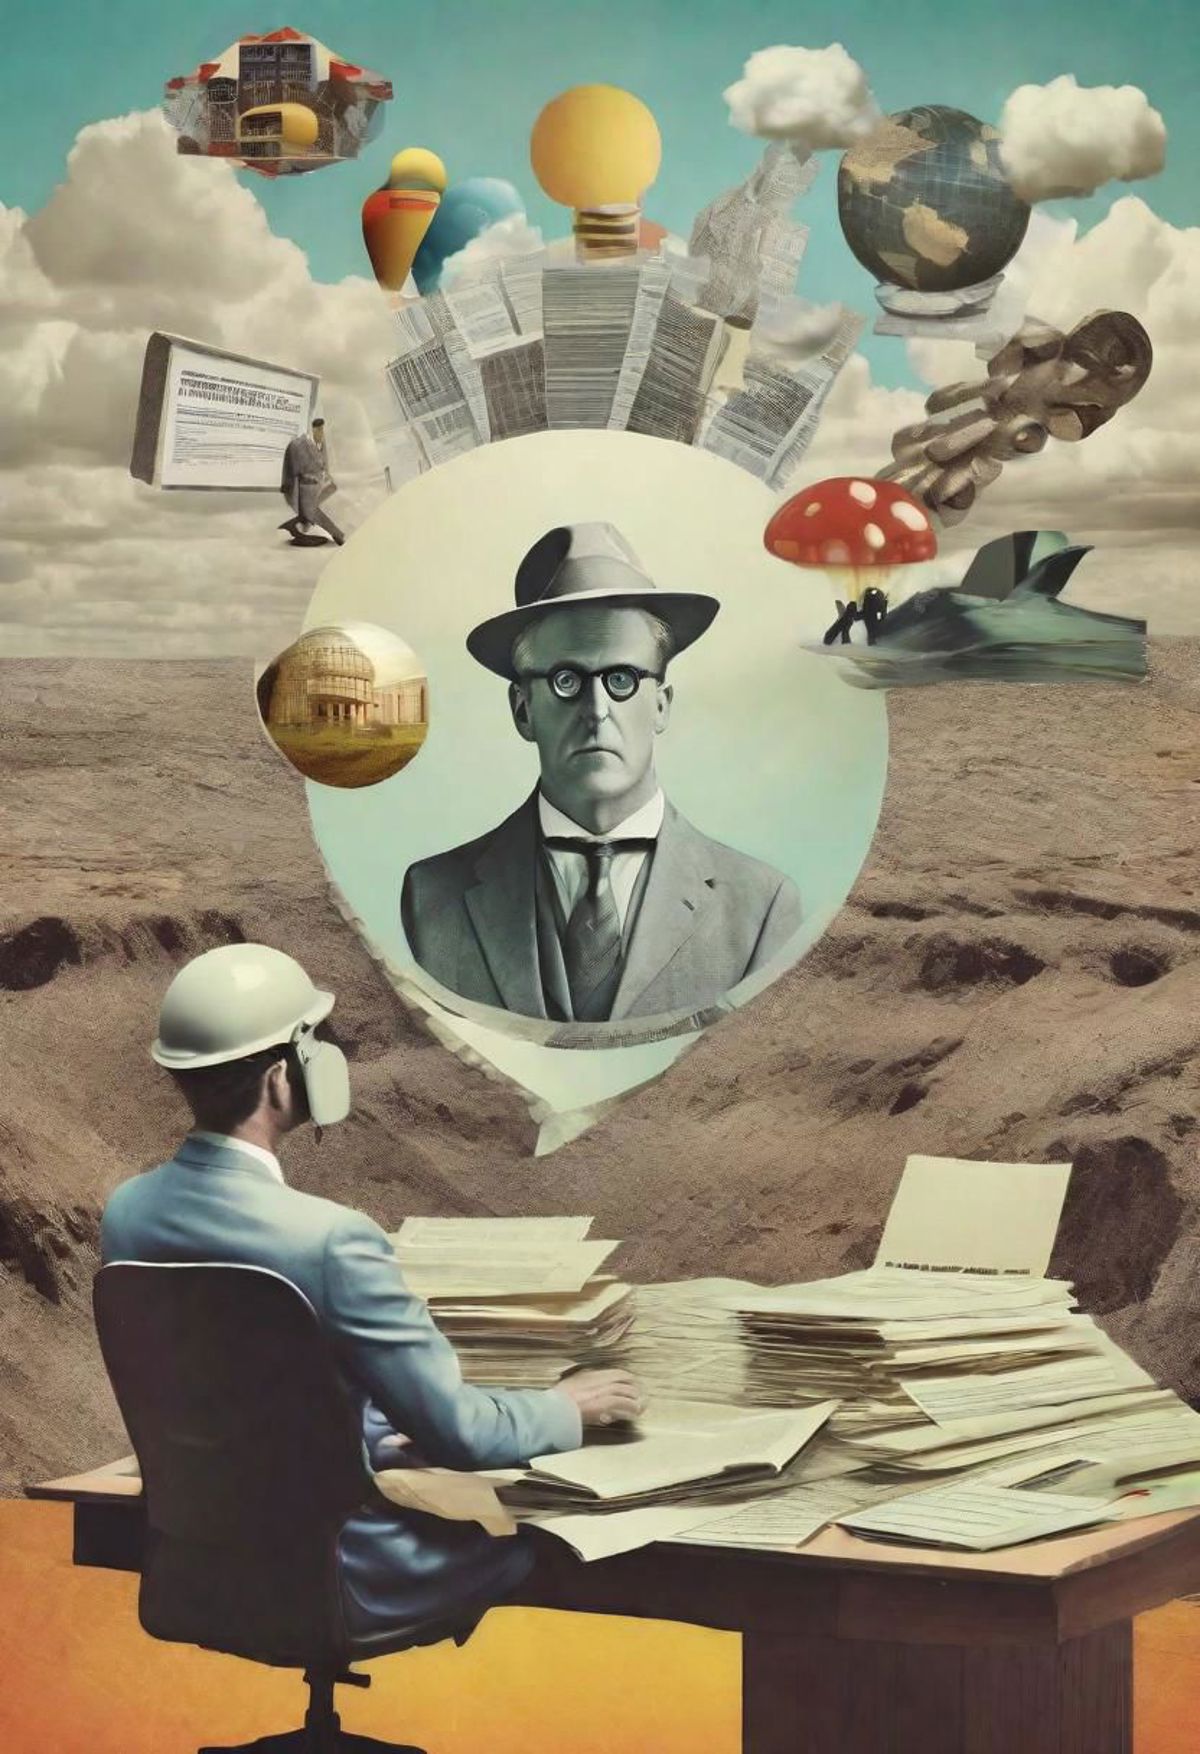 Surreal Collage image by ArtHistorian